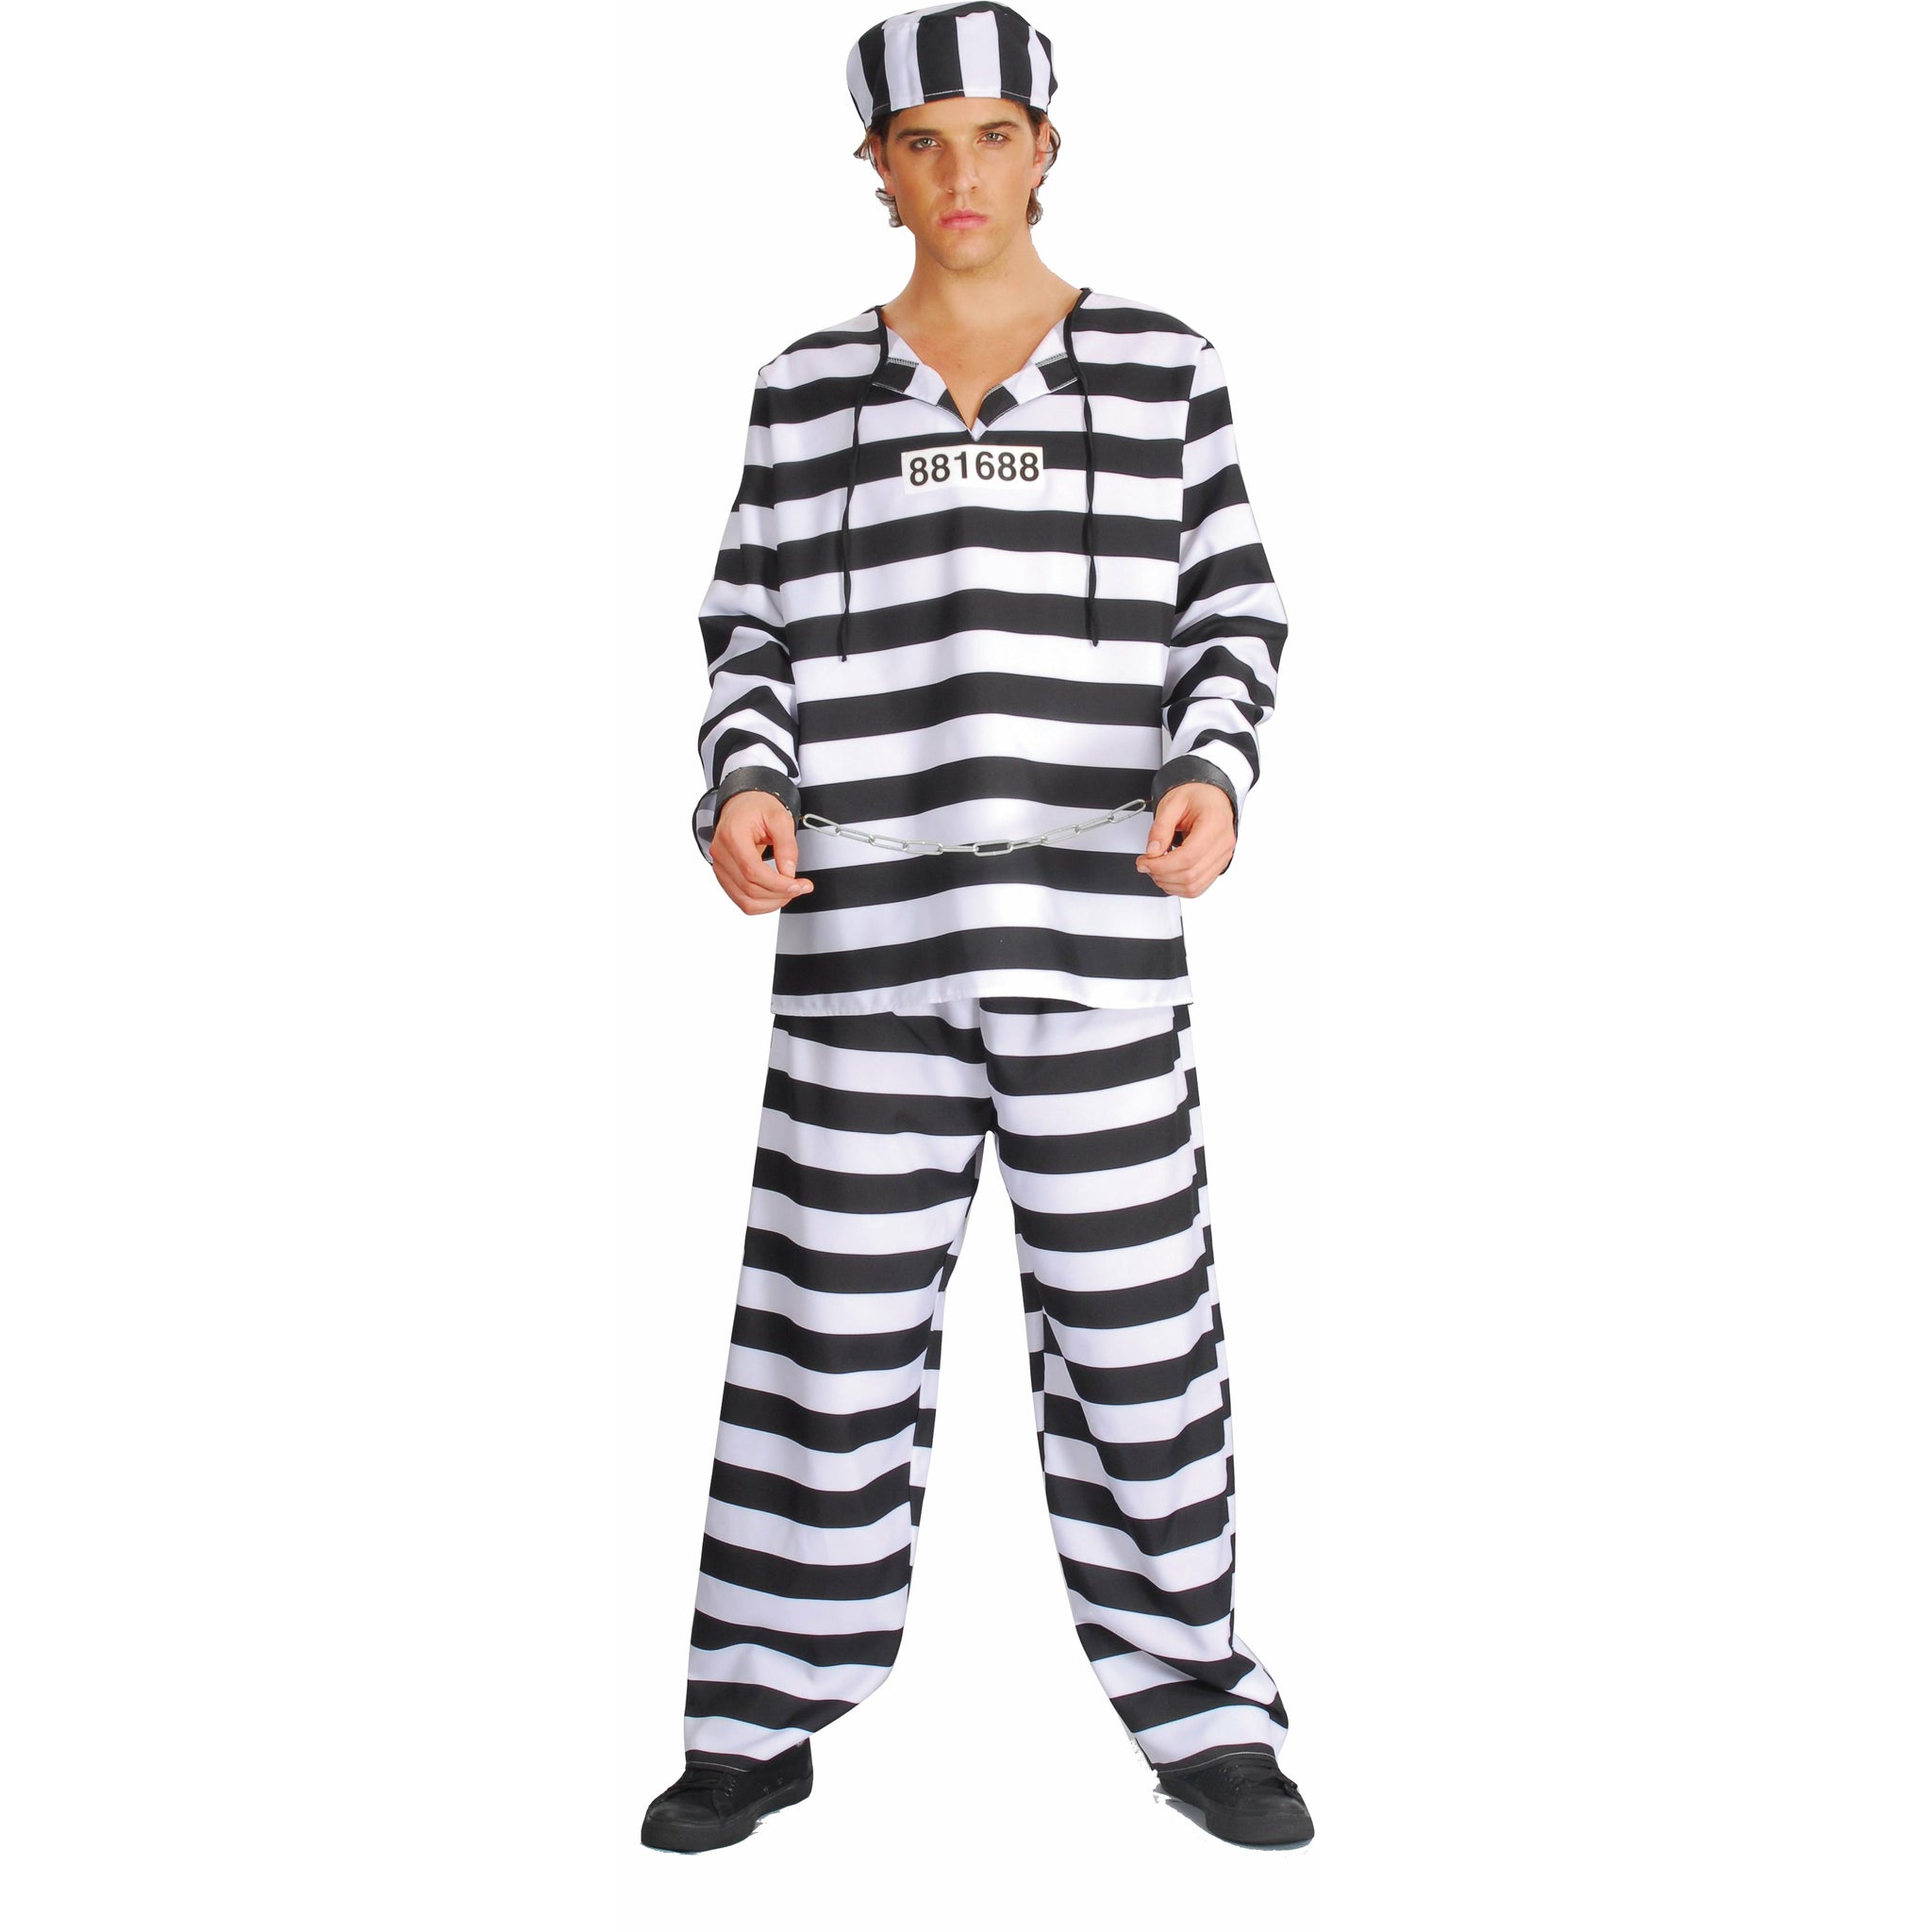 Buy Ciao - Adult Costume - Inmate (62019)